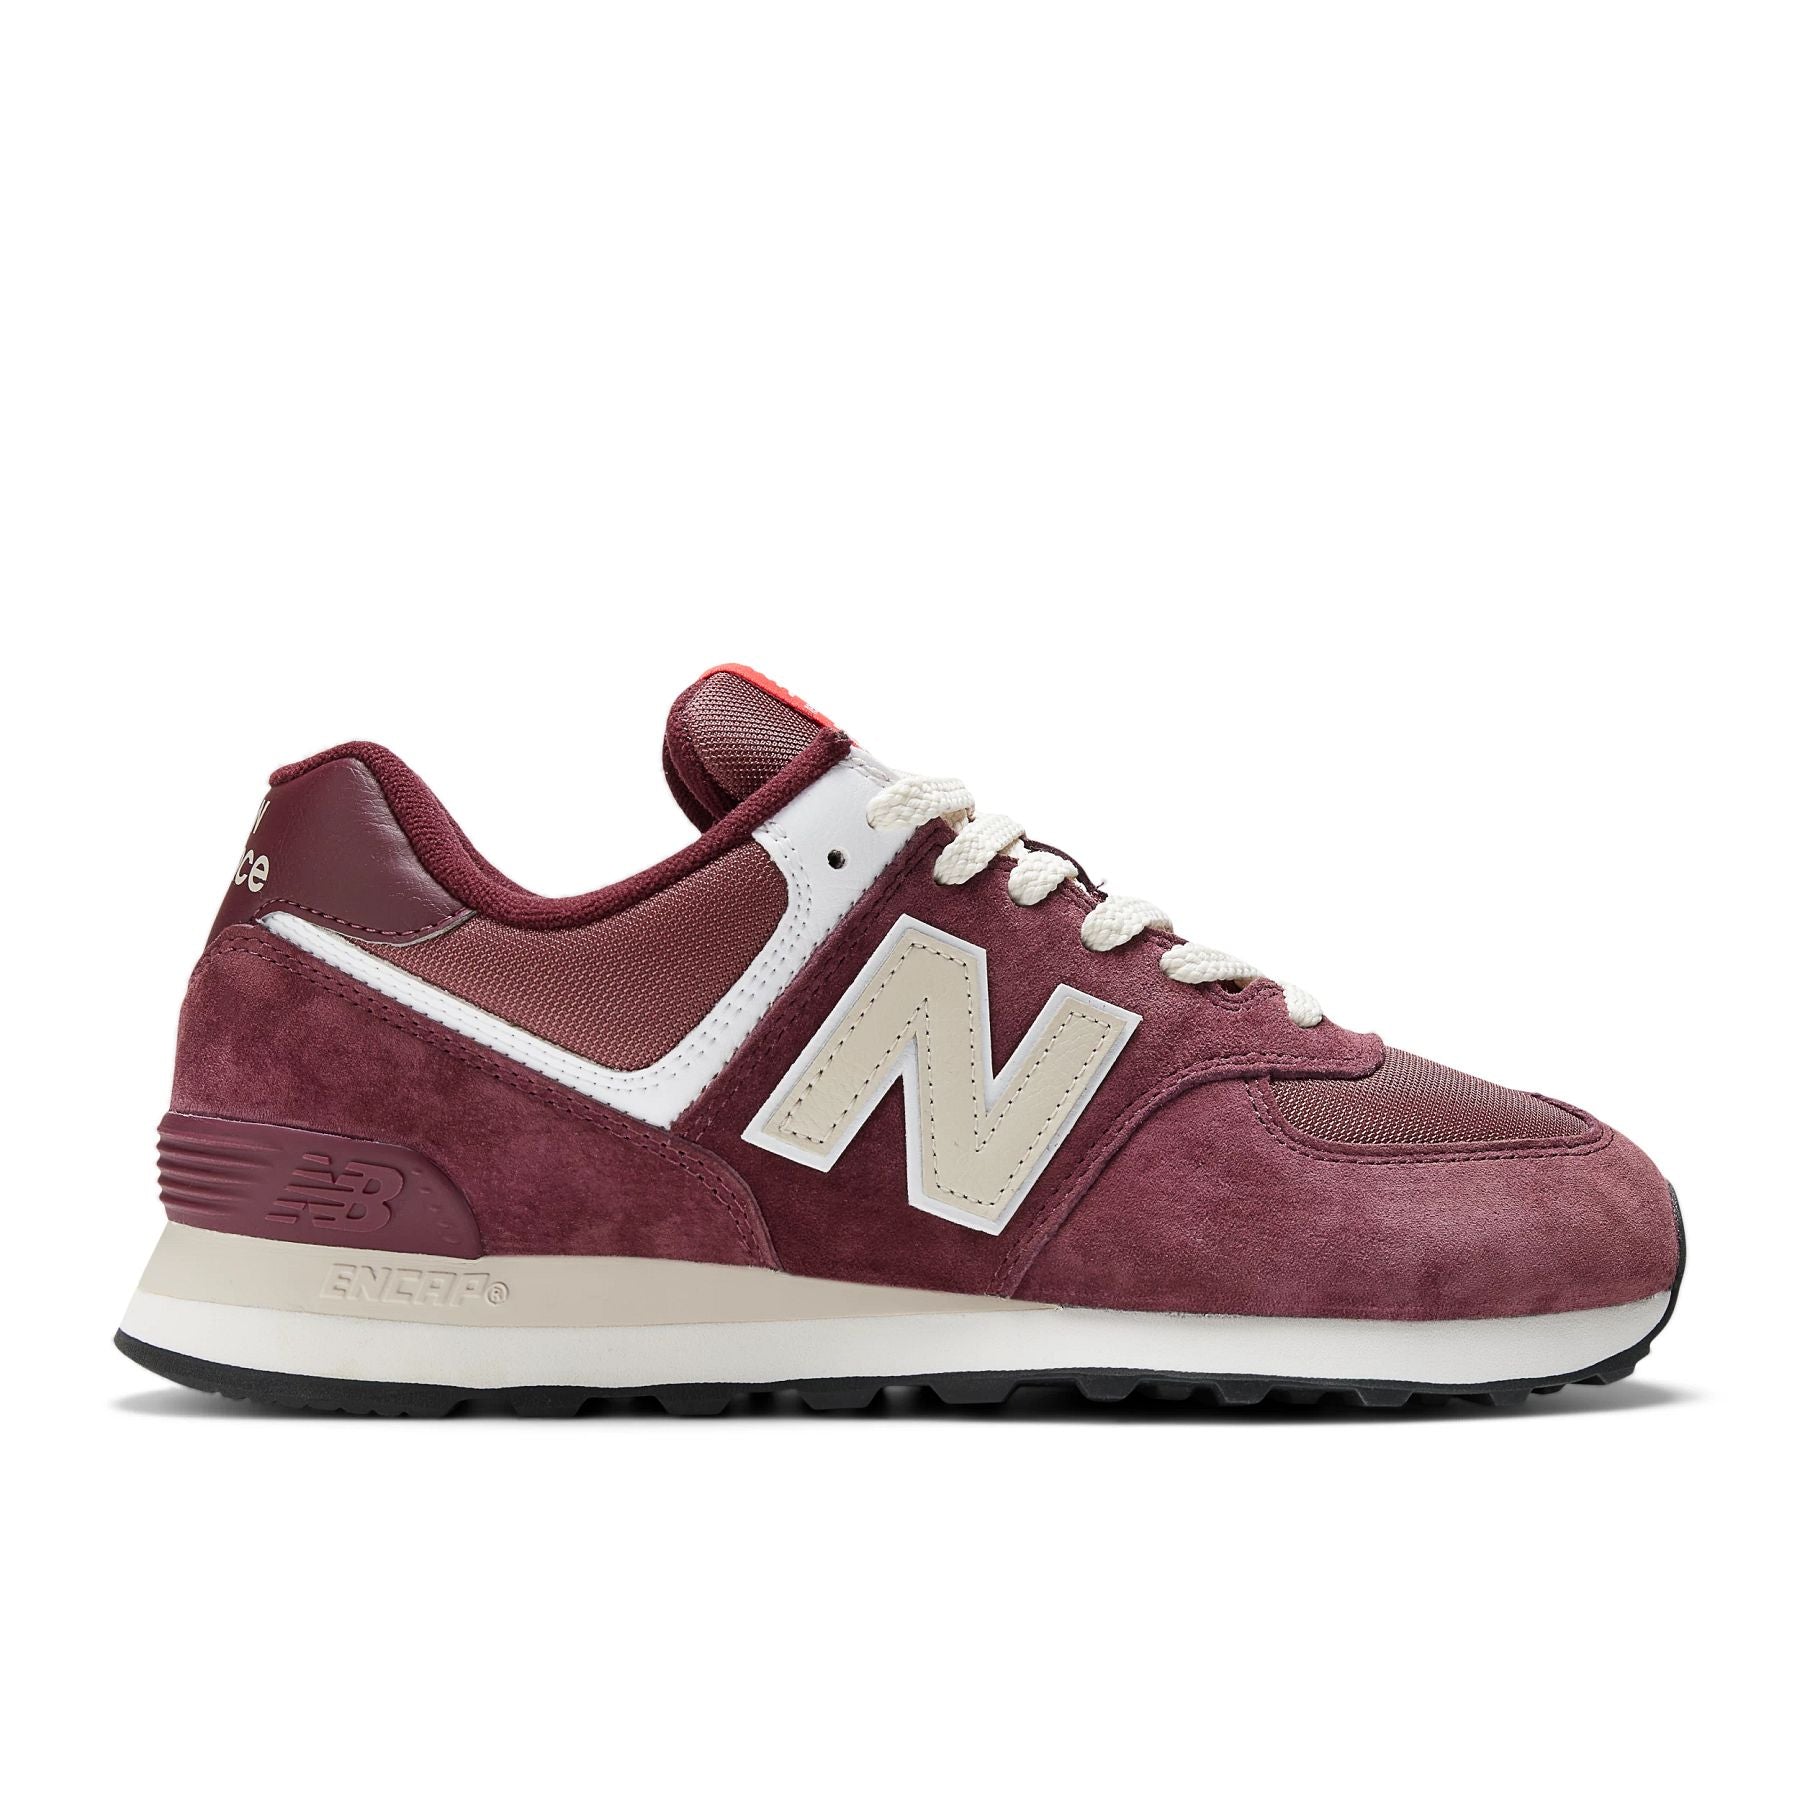 Lateral view of the Men's 574 in Maroon/Grey